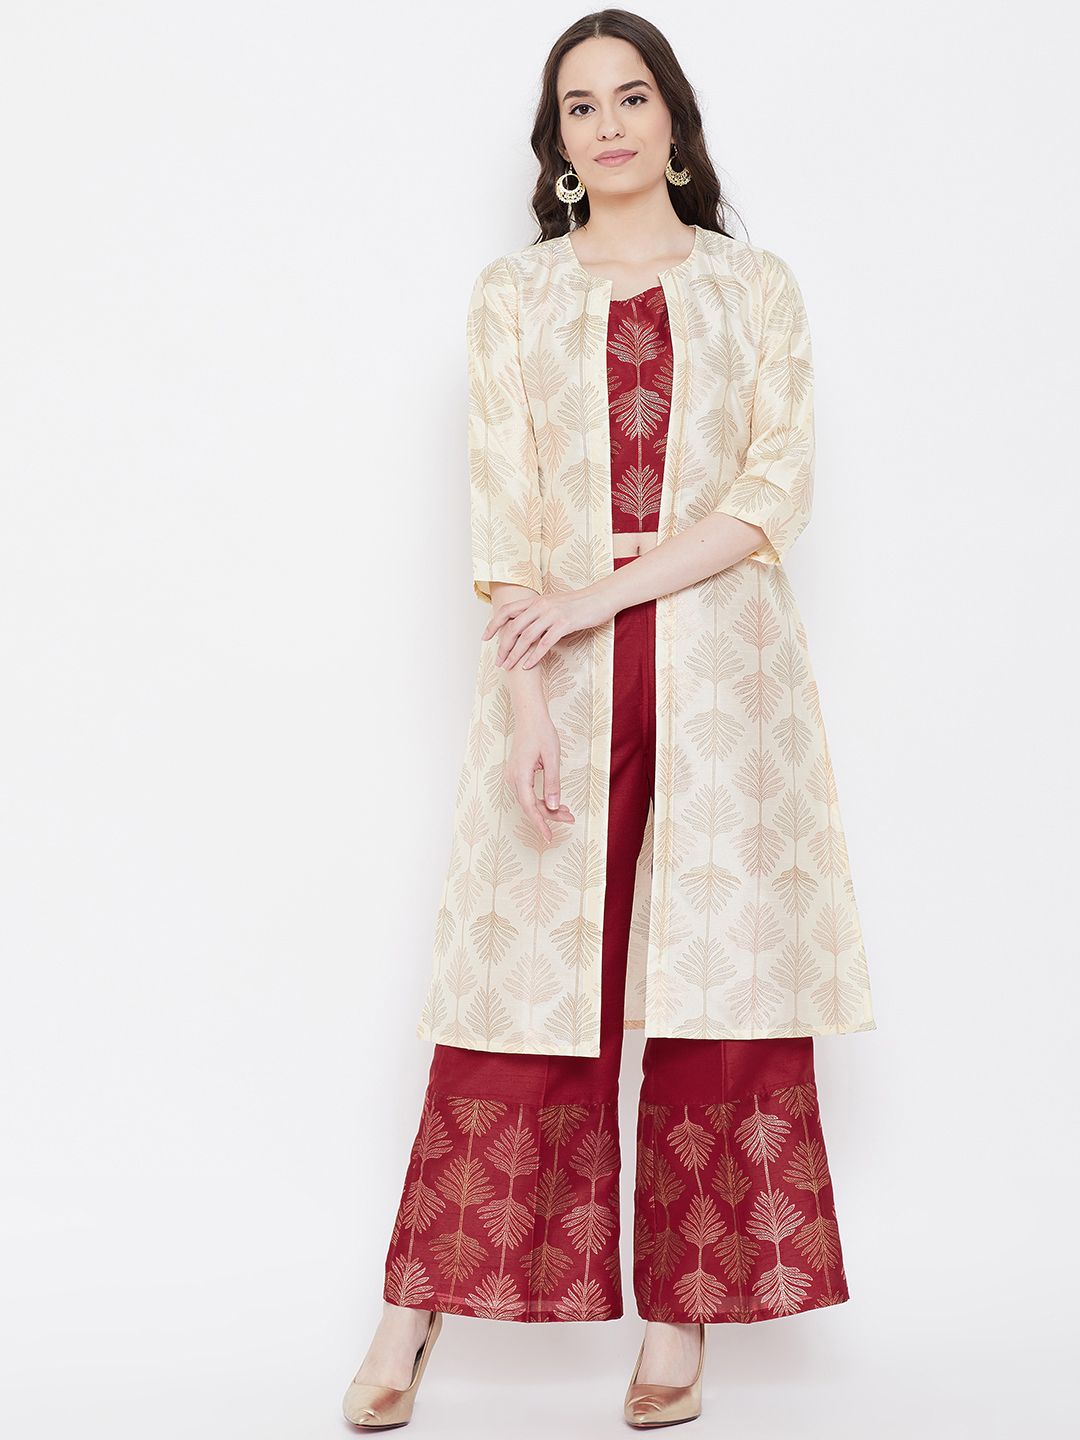 Be Indi Women Maroon & Beige Block Print Top with Palazzos & Shrug Price in India